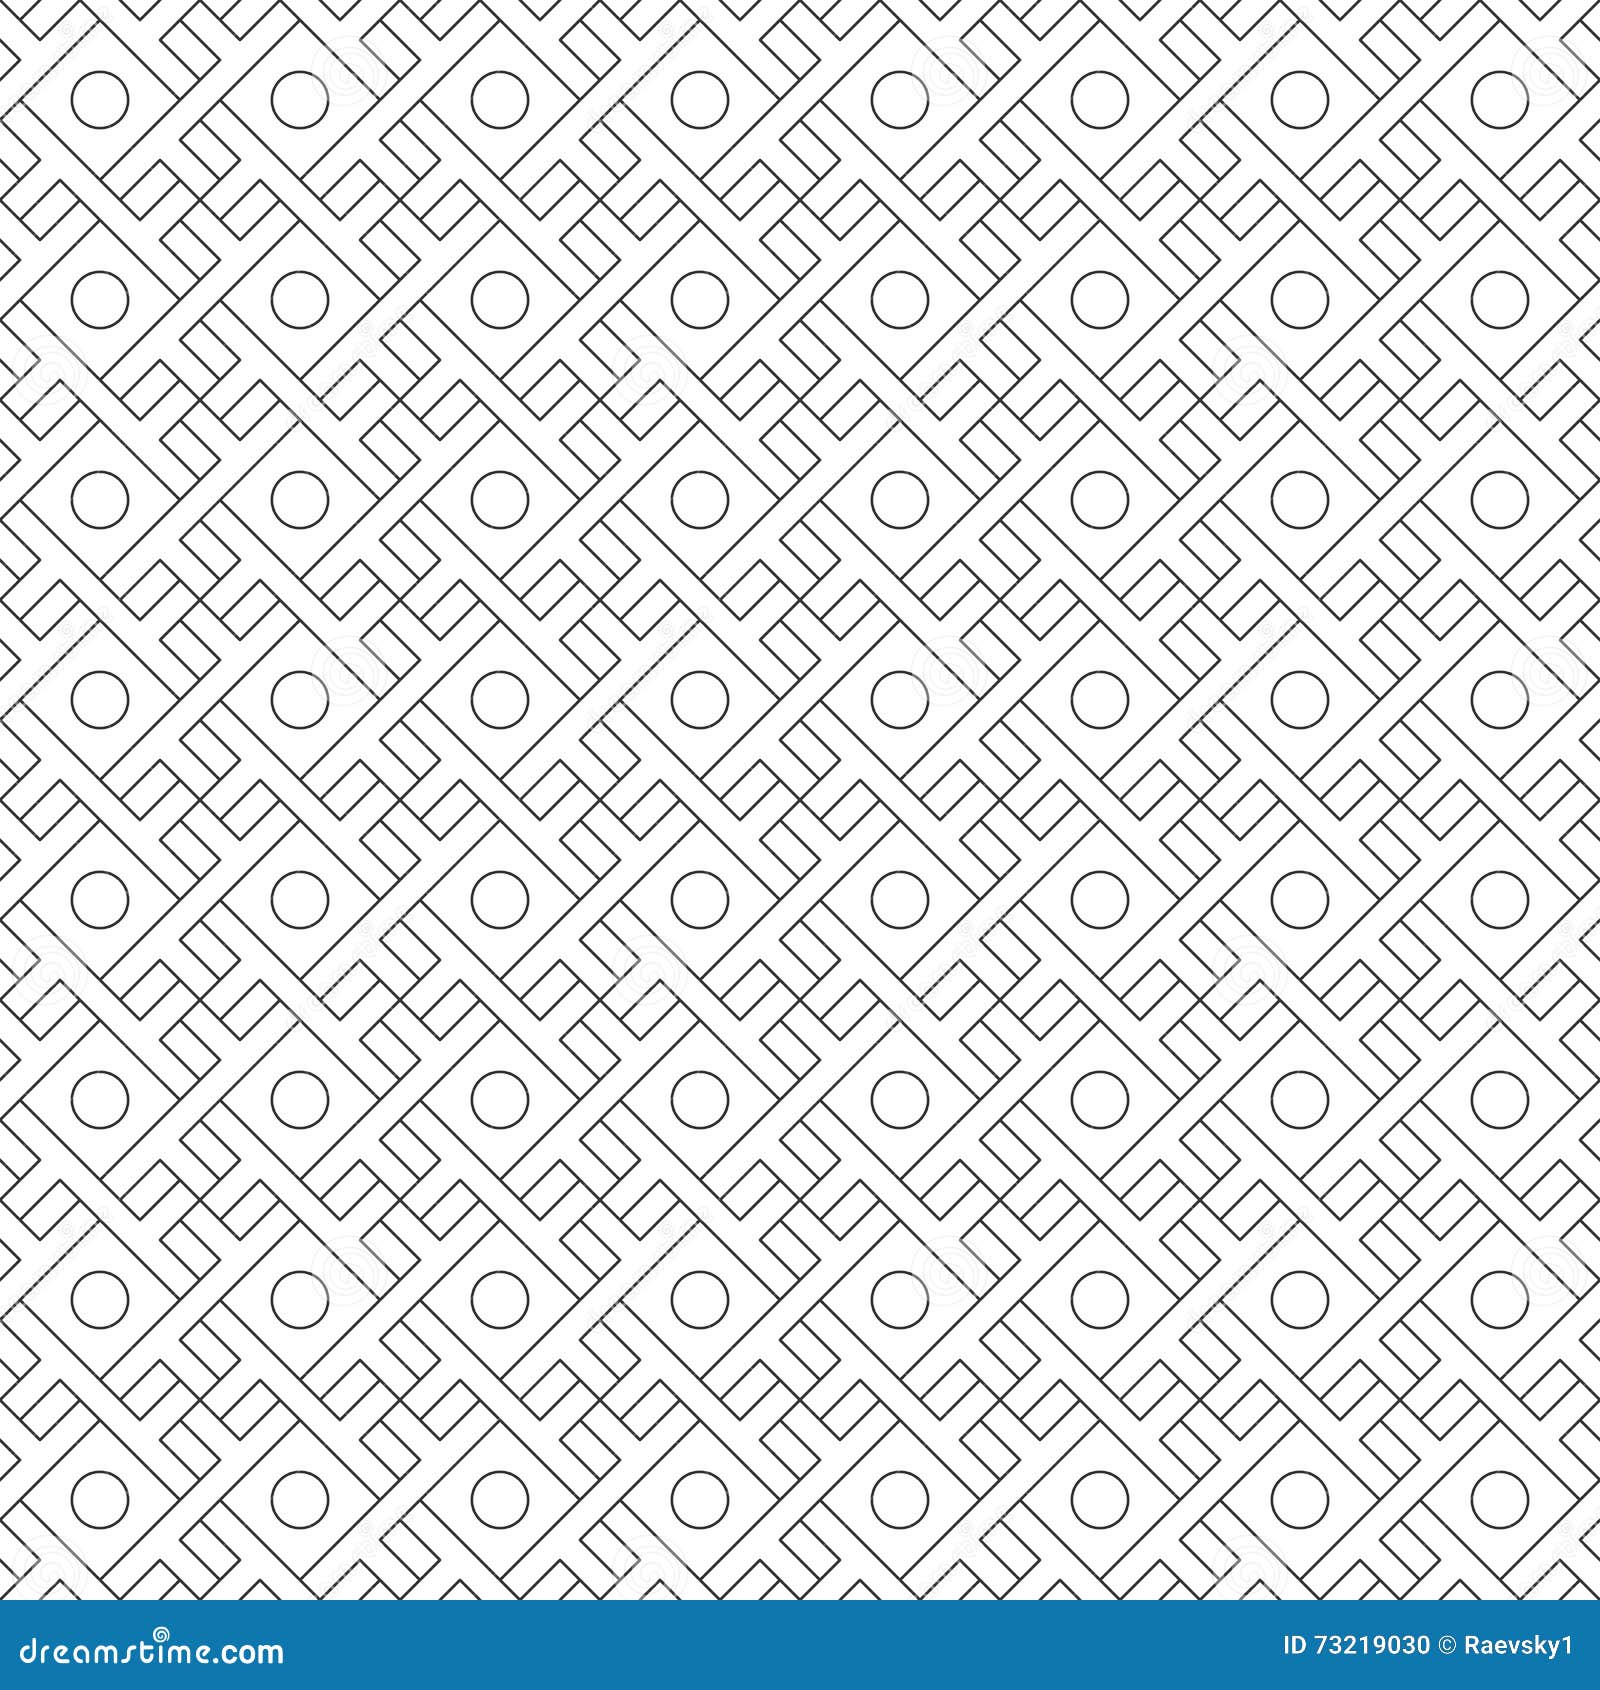 Seamless Pattern with Overlapping Geometric Square Shapes Forming ...